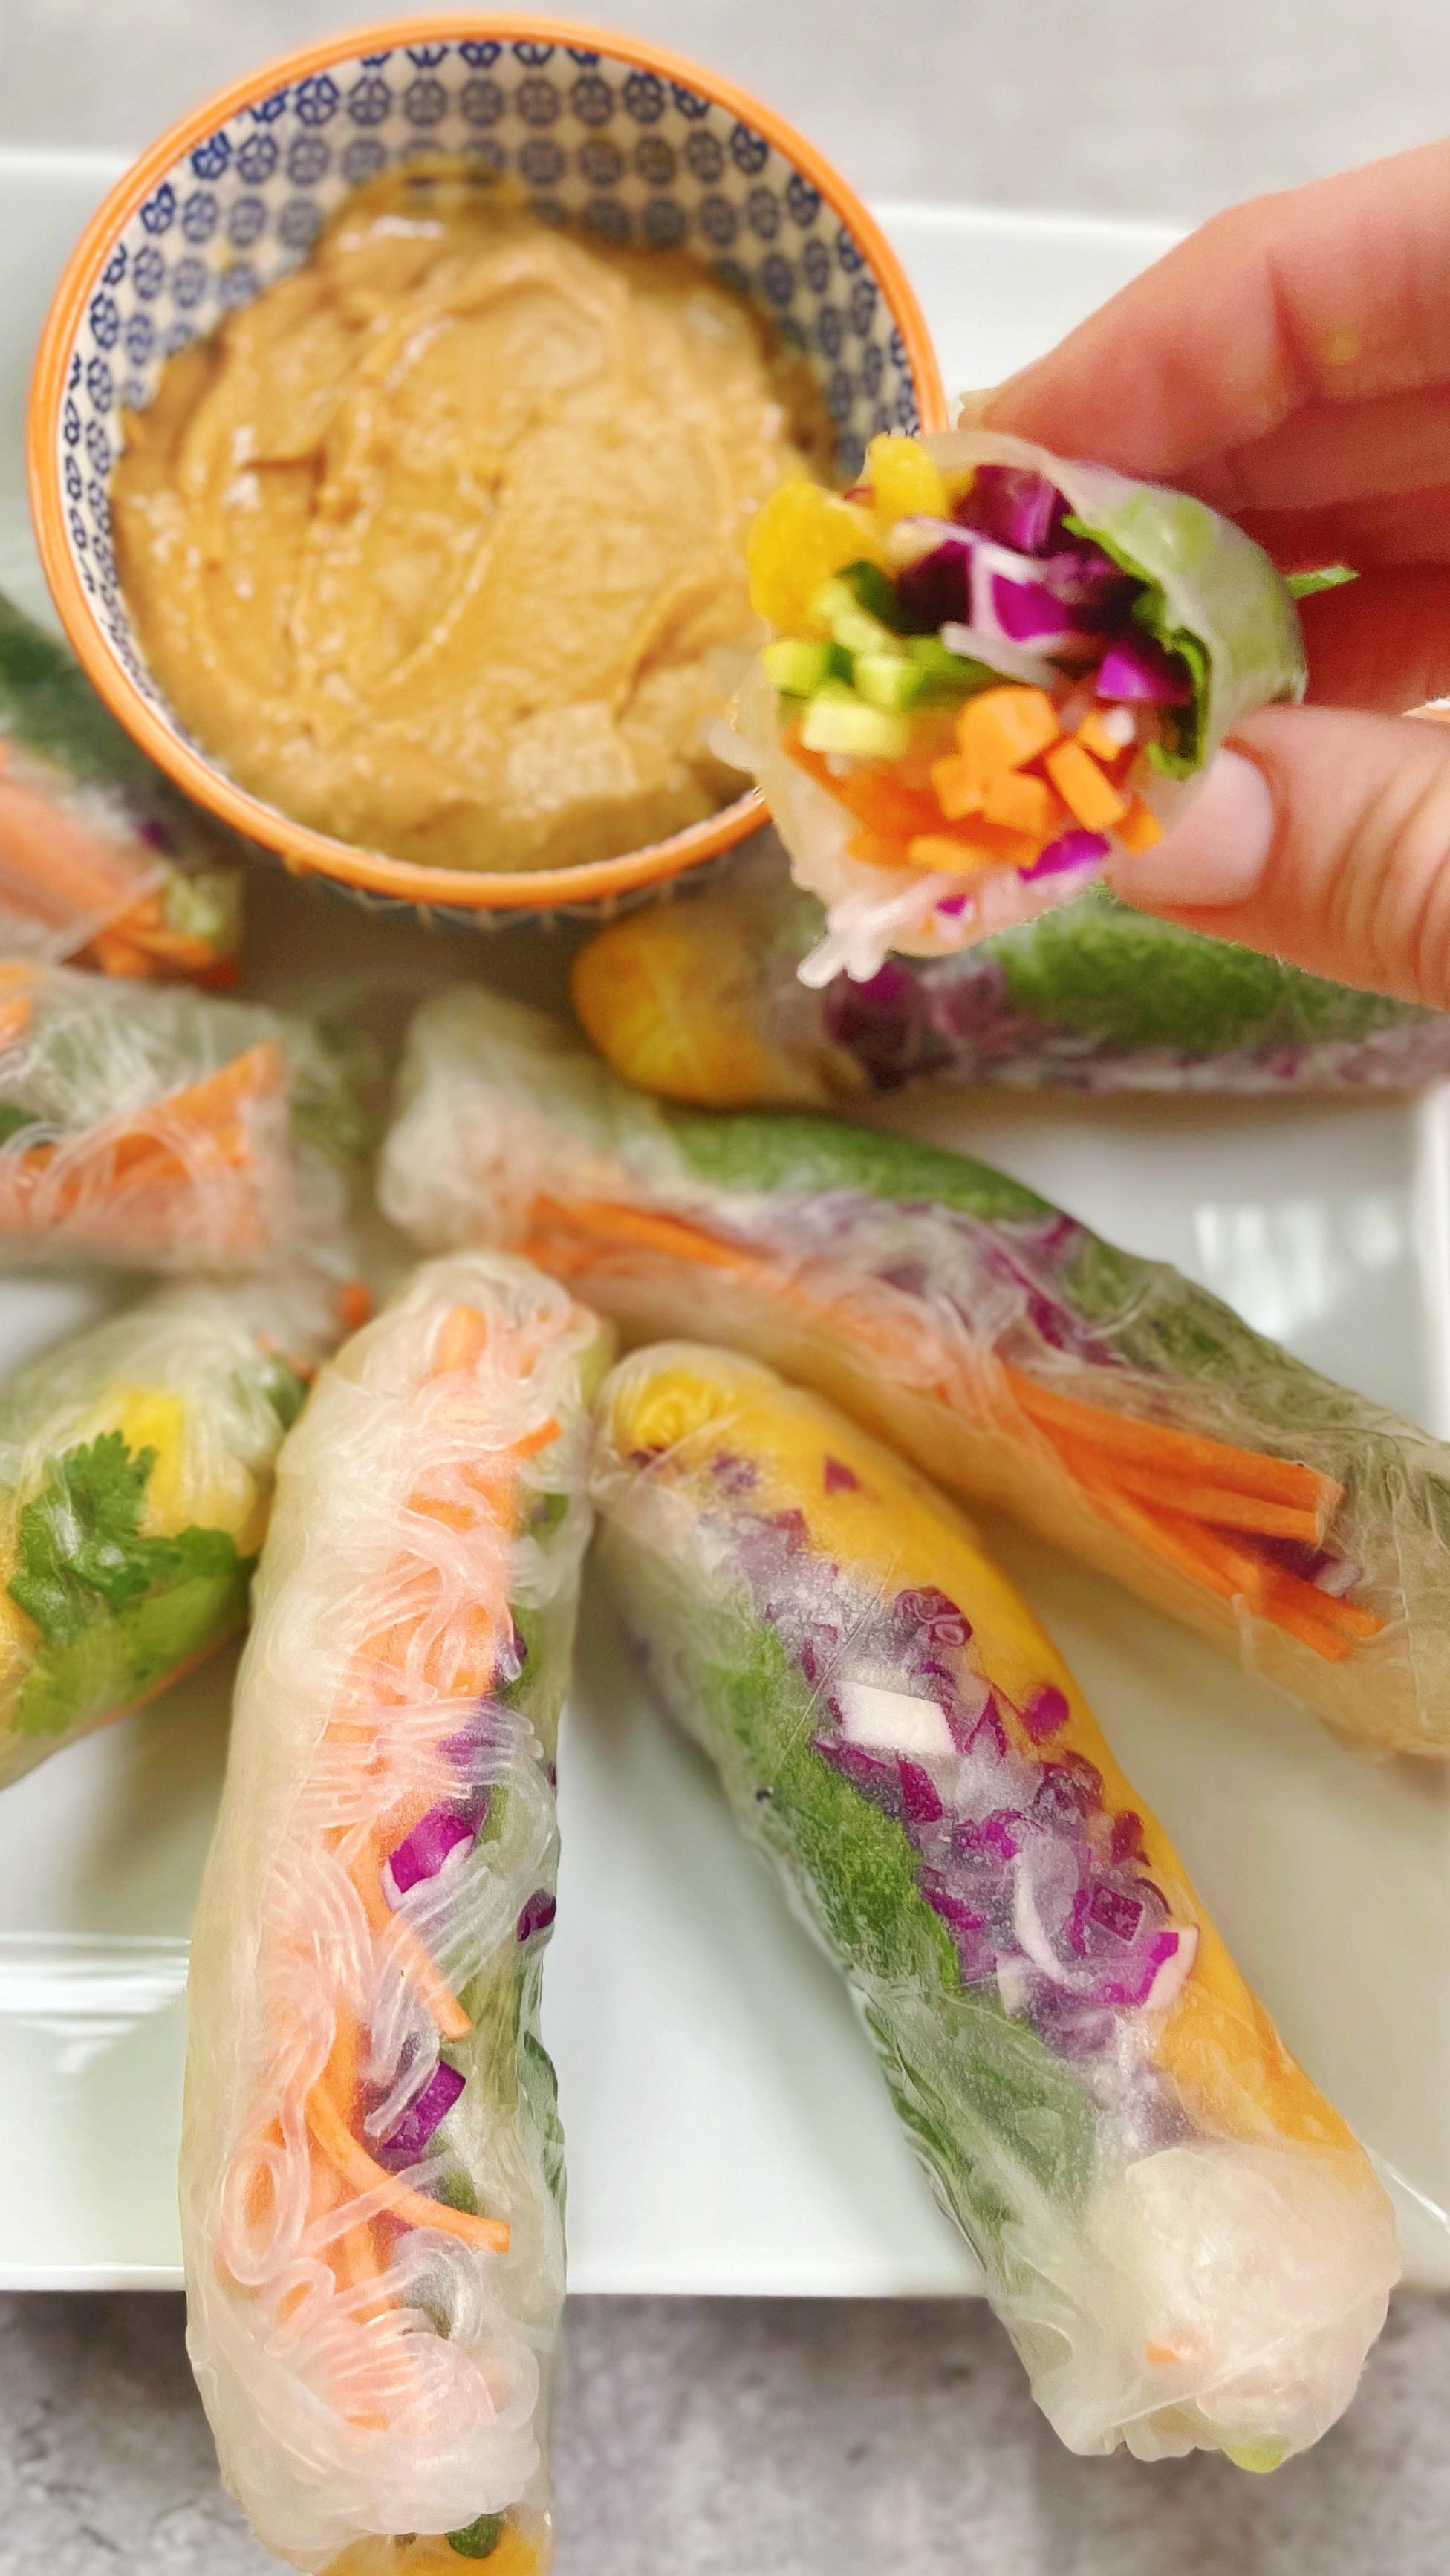 Go to @dinnerreinvented for more fun summer recipes like my rainbow spring rolls to celebrate #pridemonth I serve these with the peanut dipping sauce which I use for chicken satay and lots of other dishes. Full recipe now up on the site! #rainbow #springroll #tastetherainbow #truecolors #cookingvideo #trendingreels #trendingrecipes #recipereels #sunmerfood #poolsidevibes #summercooking #foodblogger #peanutsauce #roniproter #dinnerreinvented